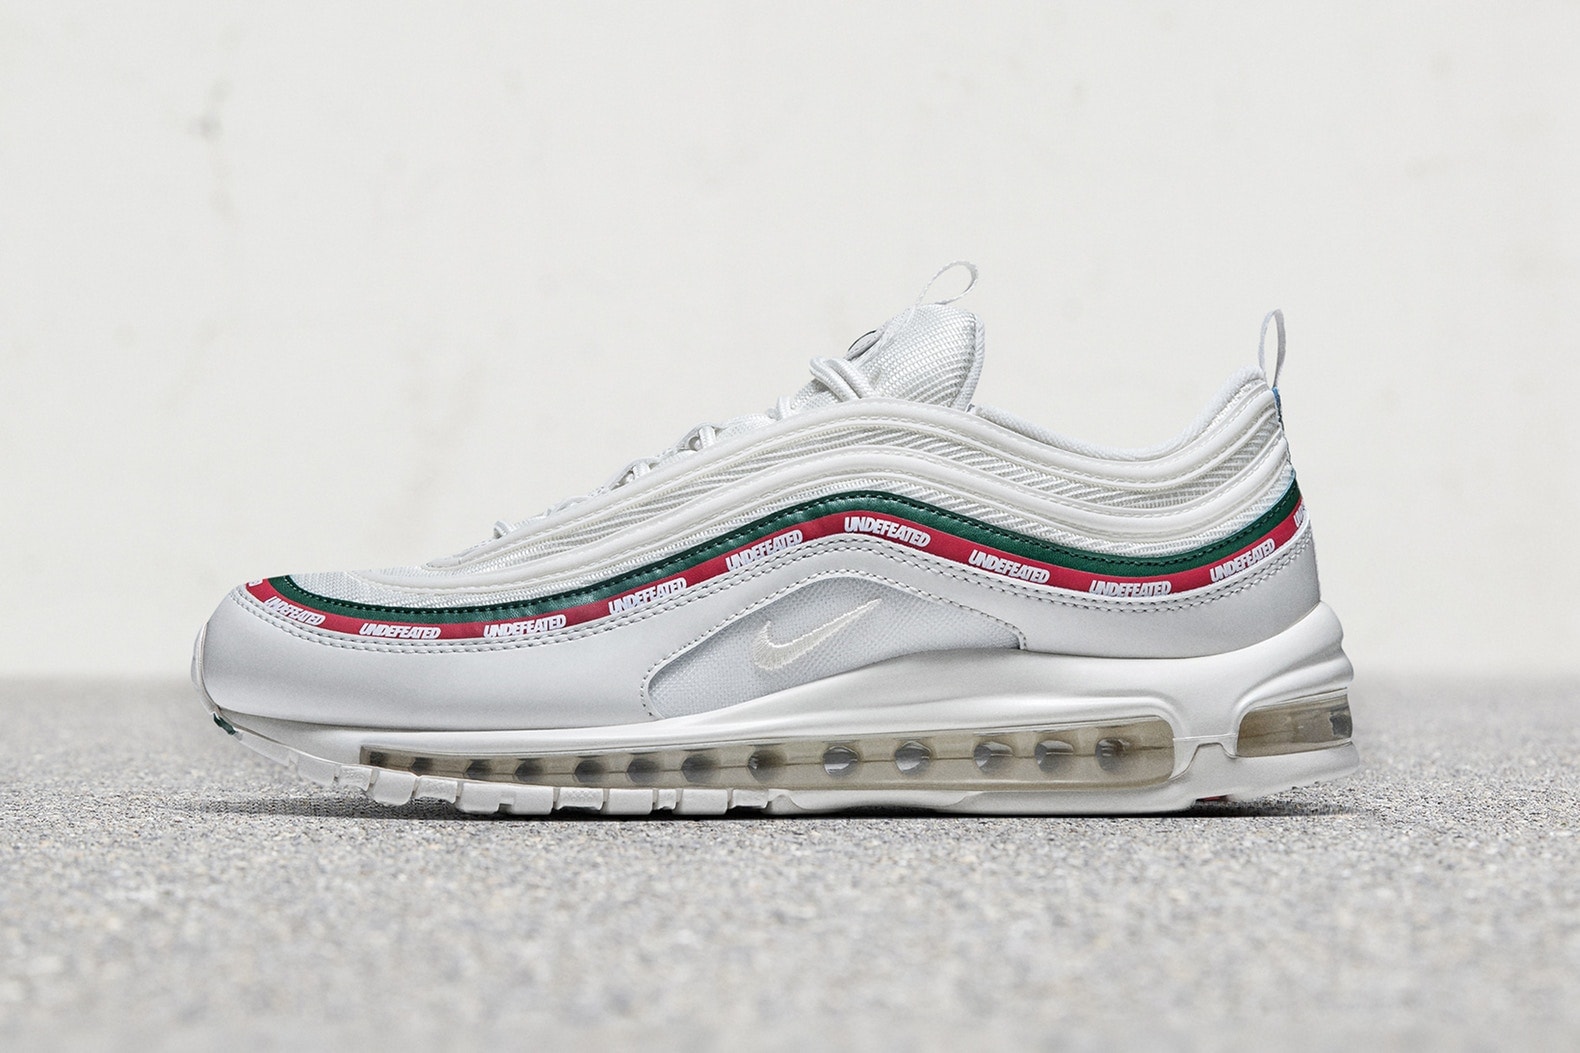 UNDEFEATED x Nike Air Max 97 OG 官方發售信息公開